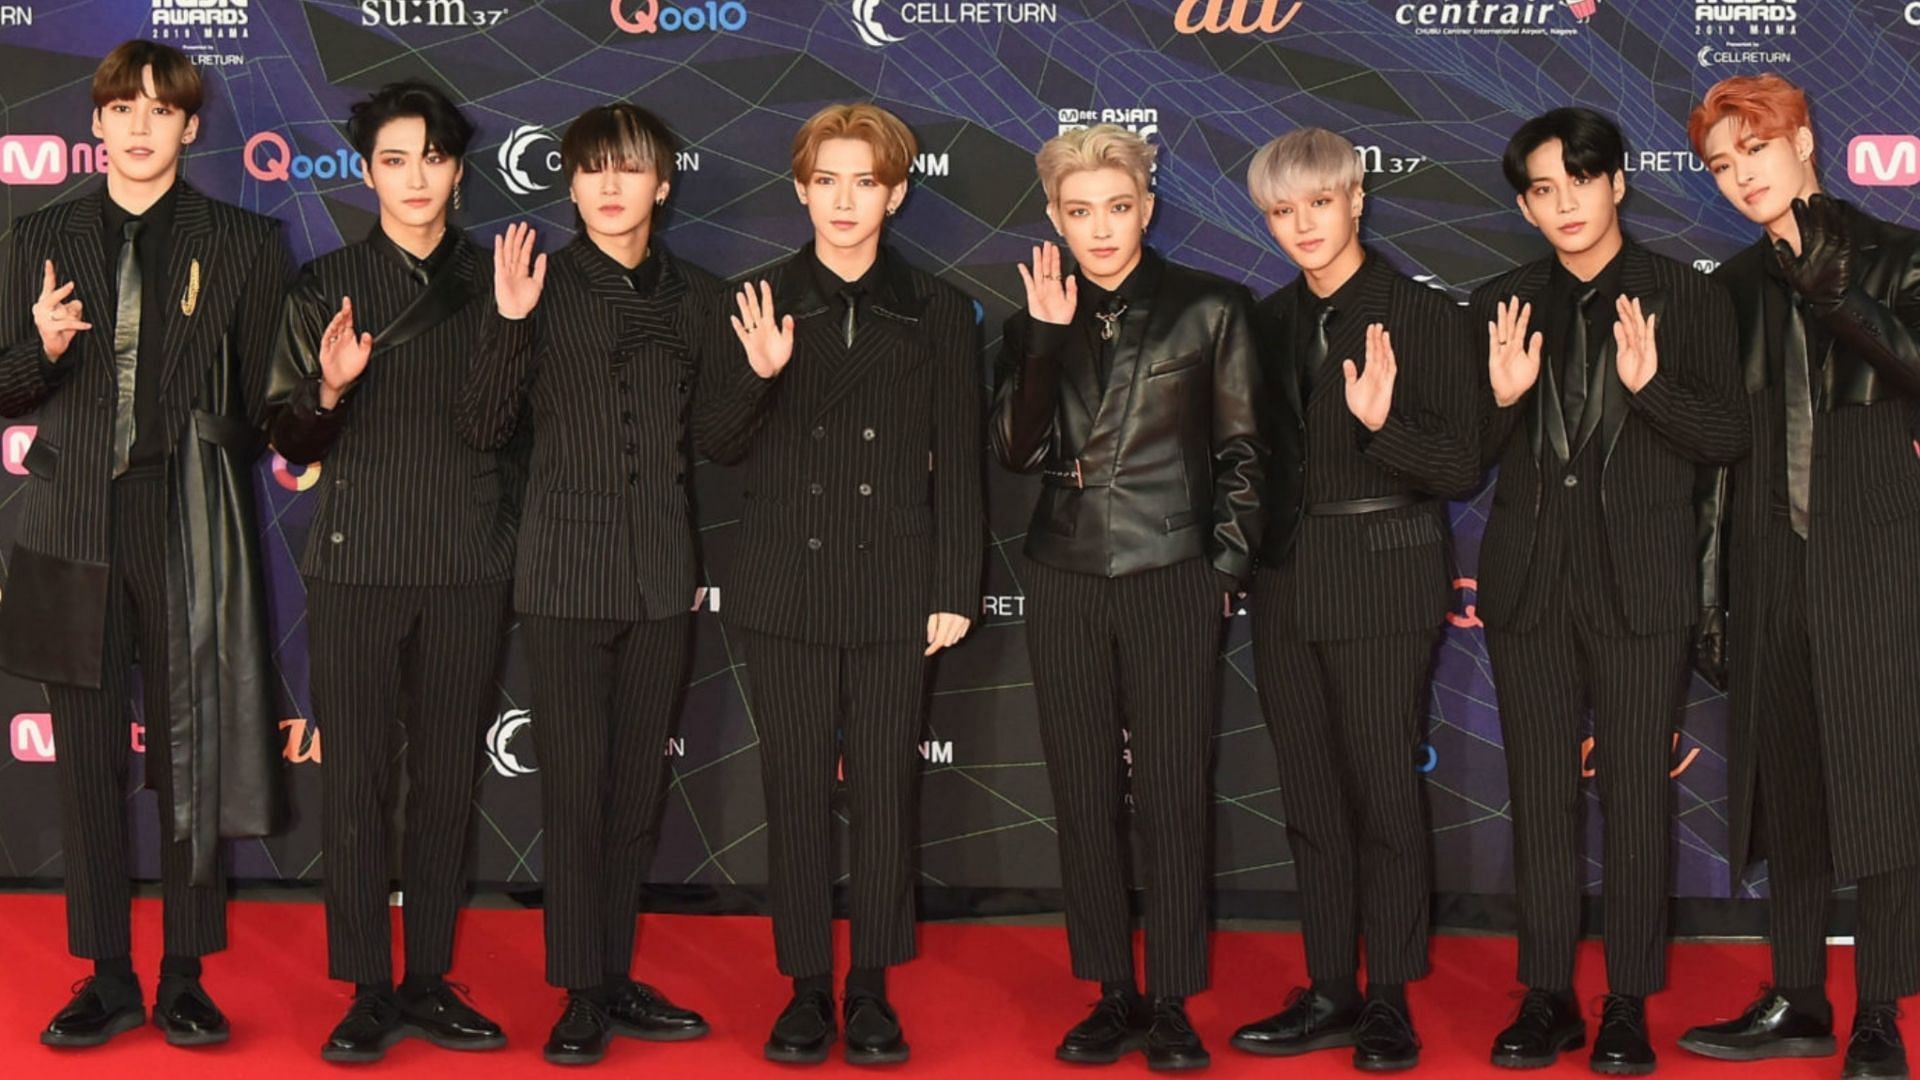 Ateez have announced a Europe tour scheduled for 2023. (Image via Getty)